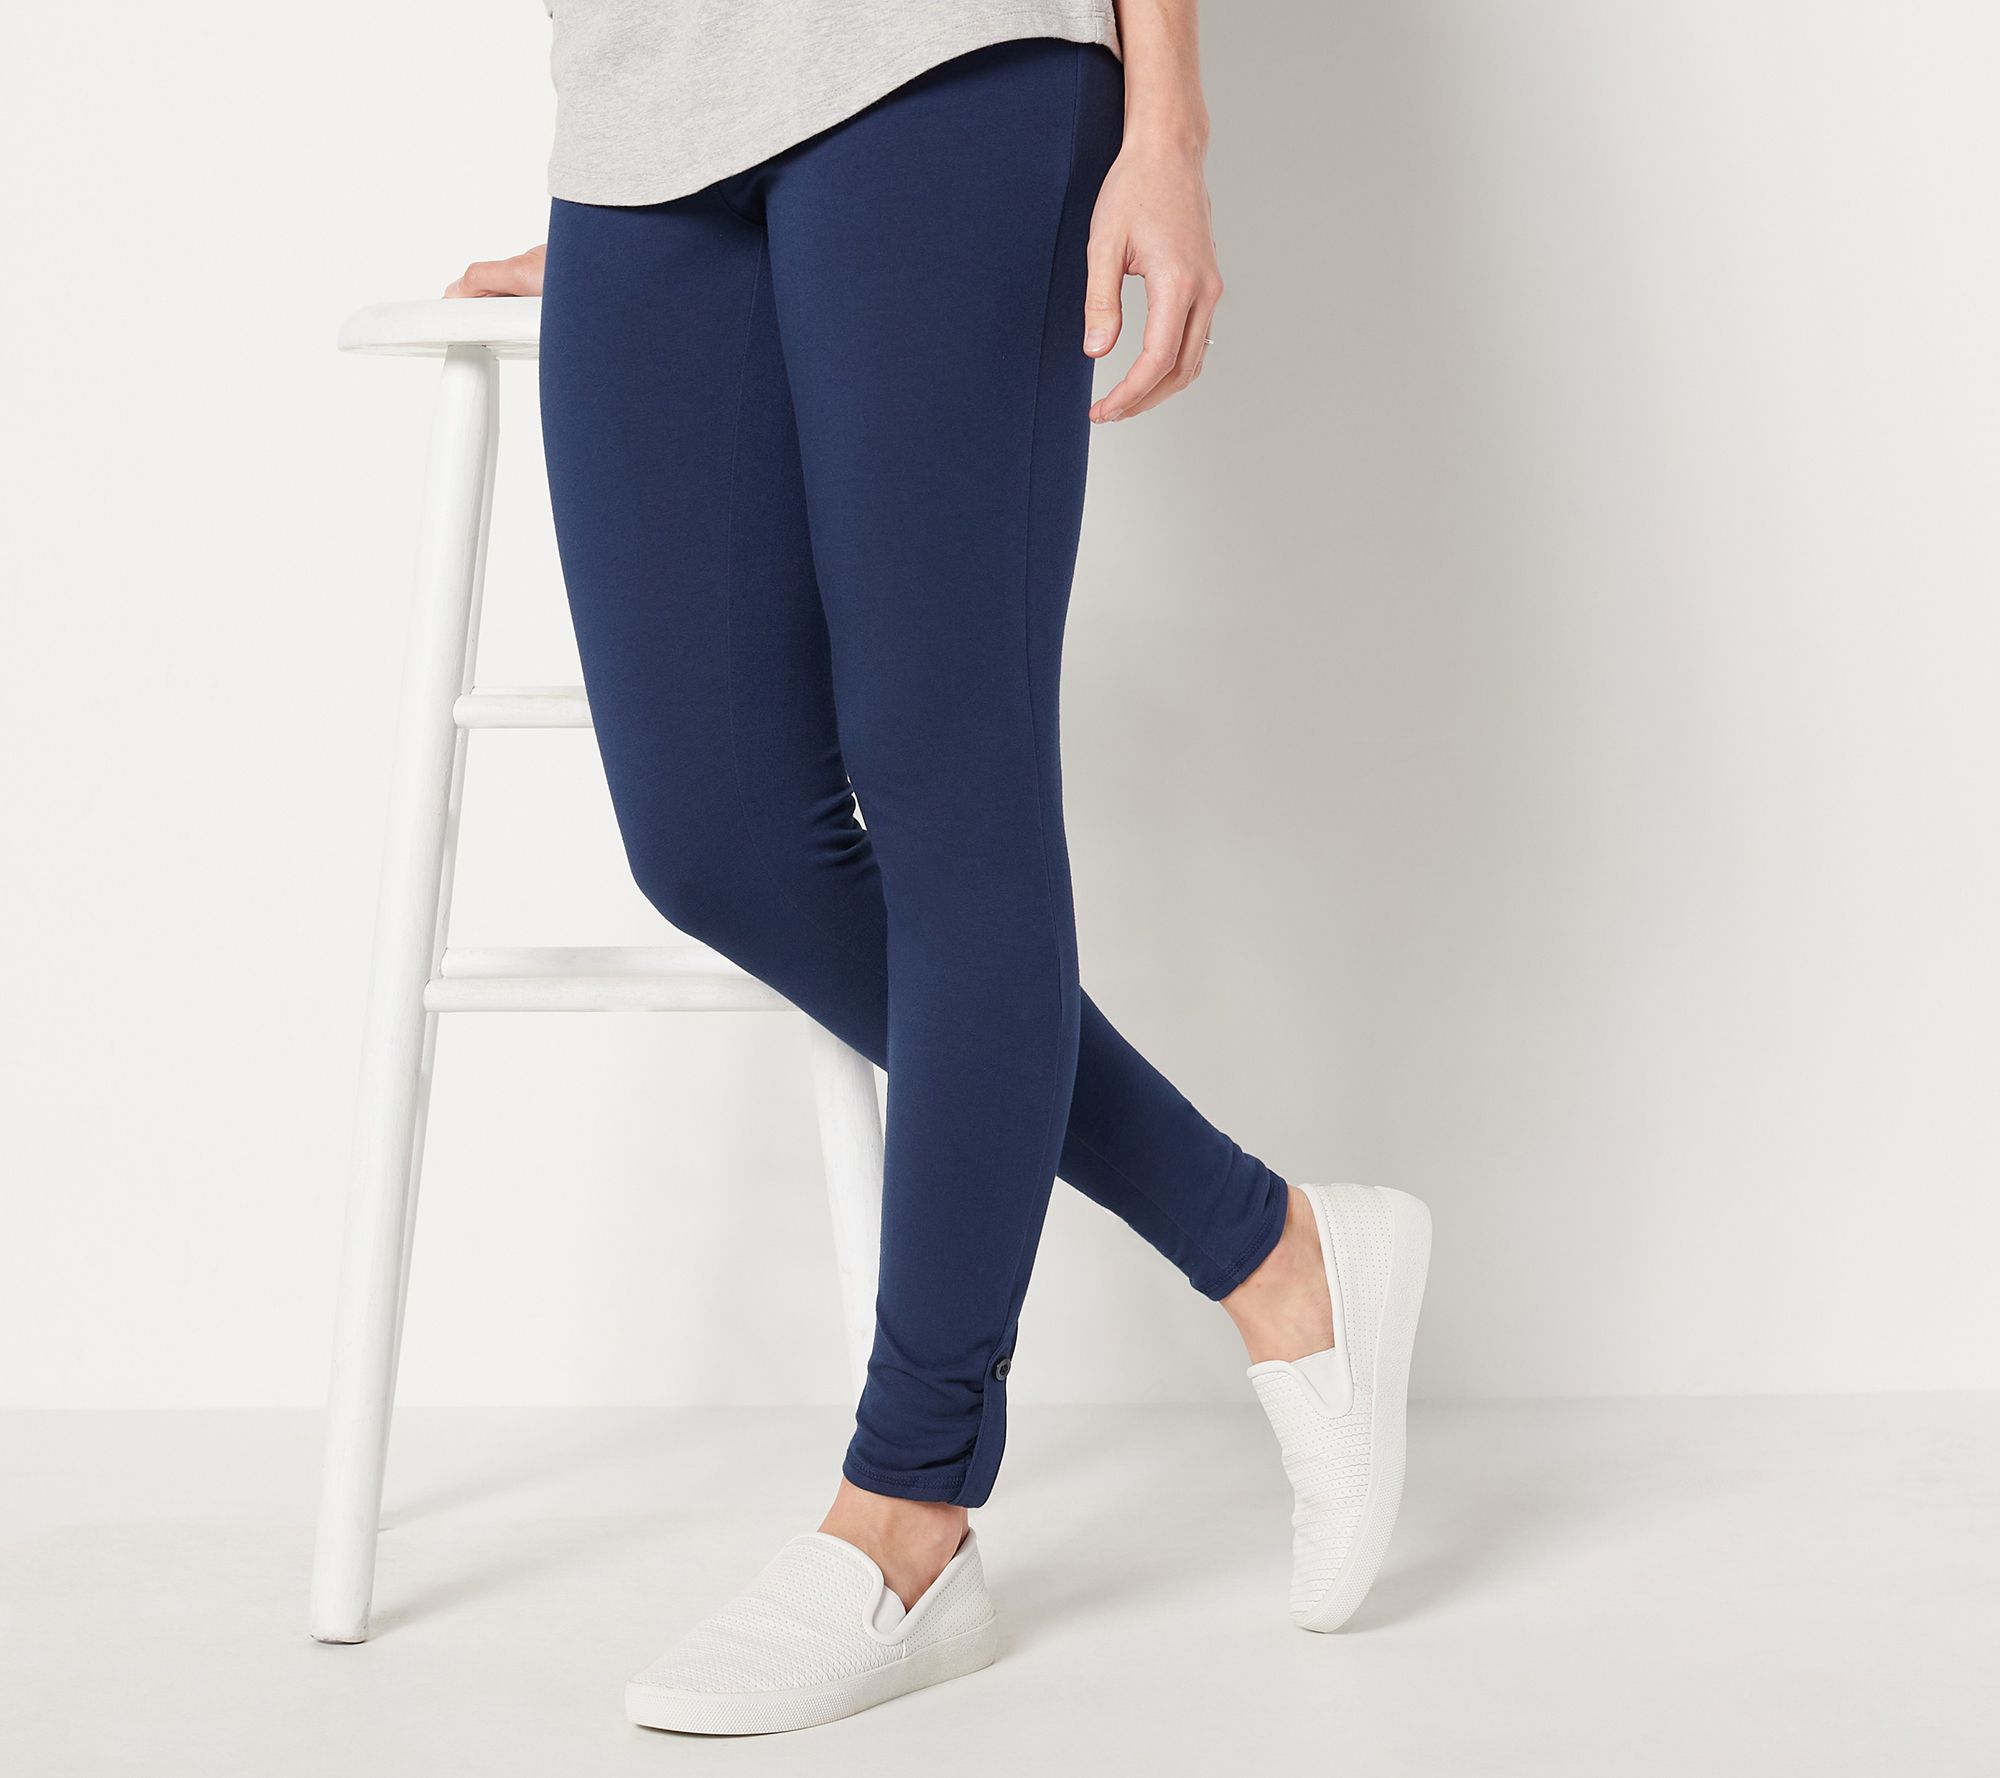 Denim & Co. Active Petite Duo Stretch Pull-On Legging with Ankle